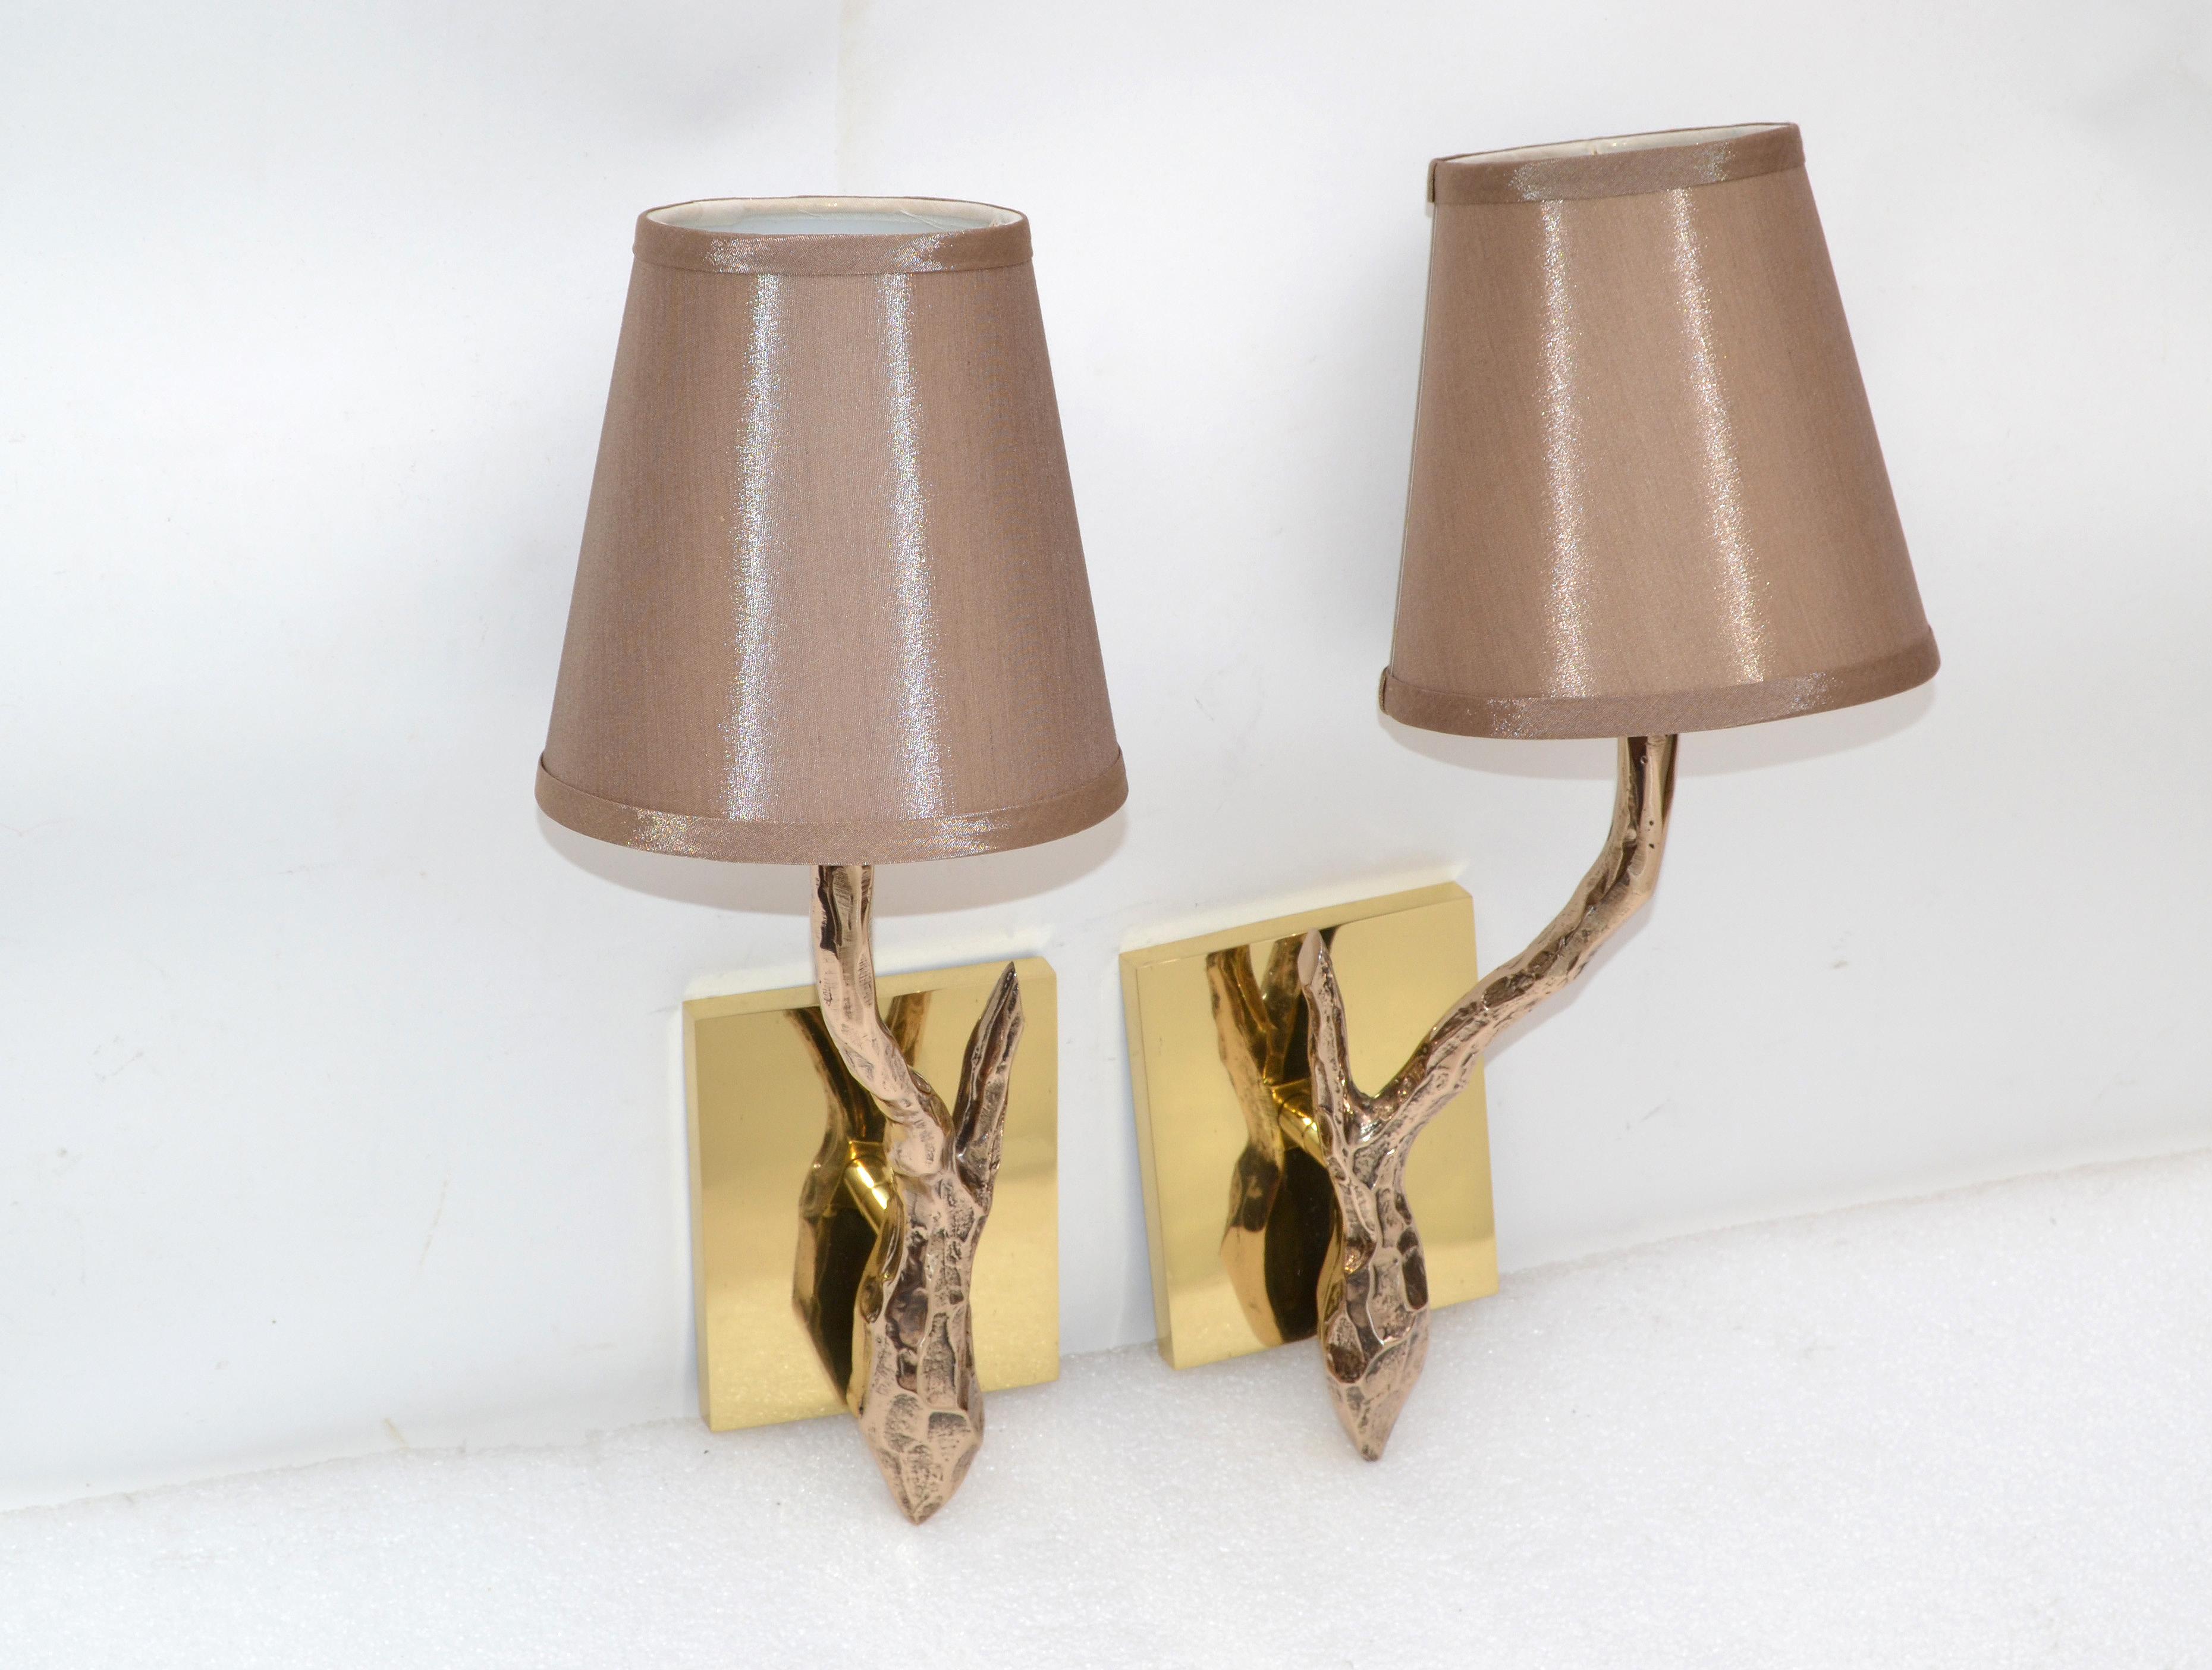 Pair of Agostini Style Sconces Bronze with Gold Metallic Shades, France, 1950s For Sale 1